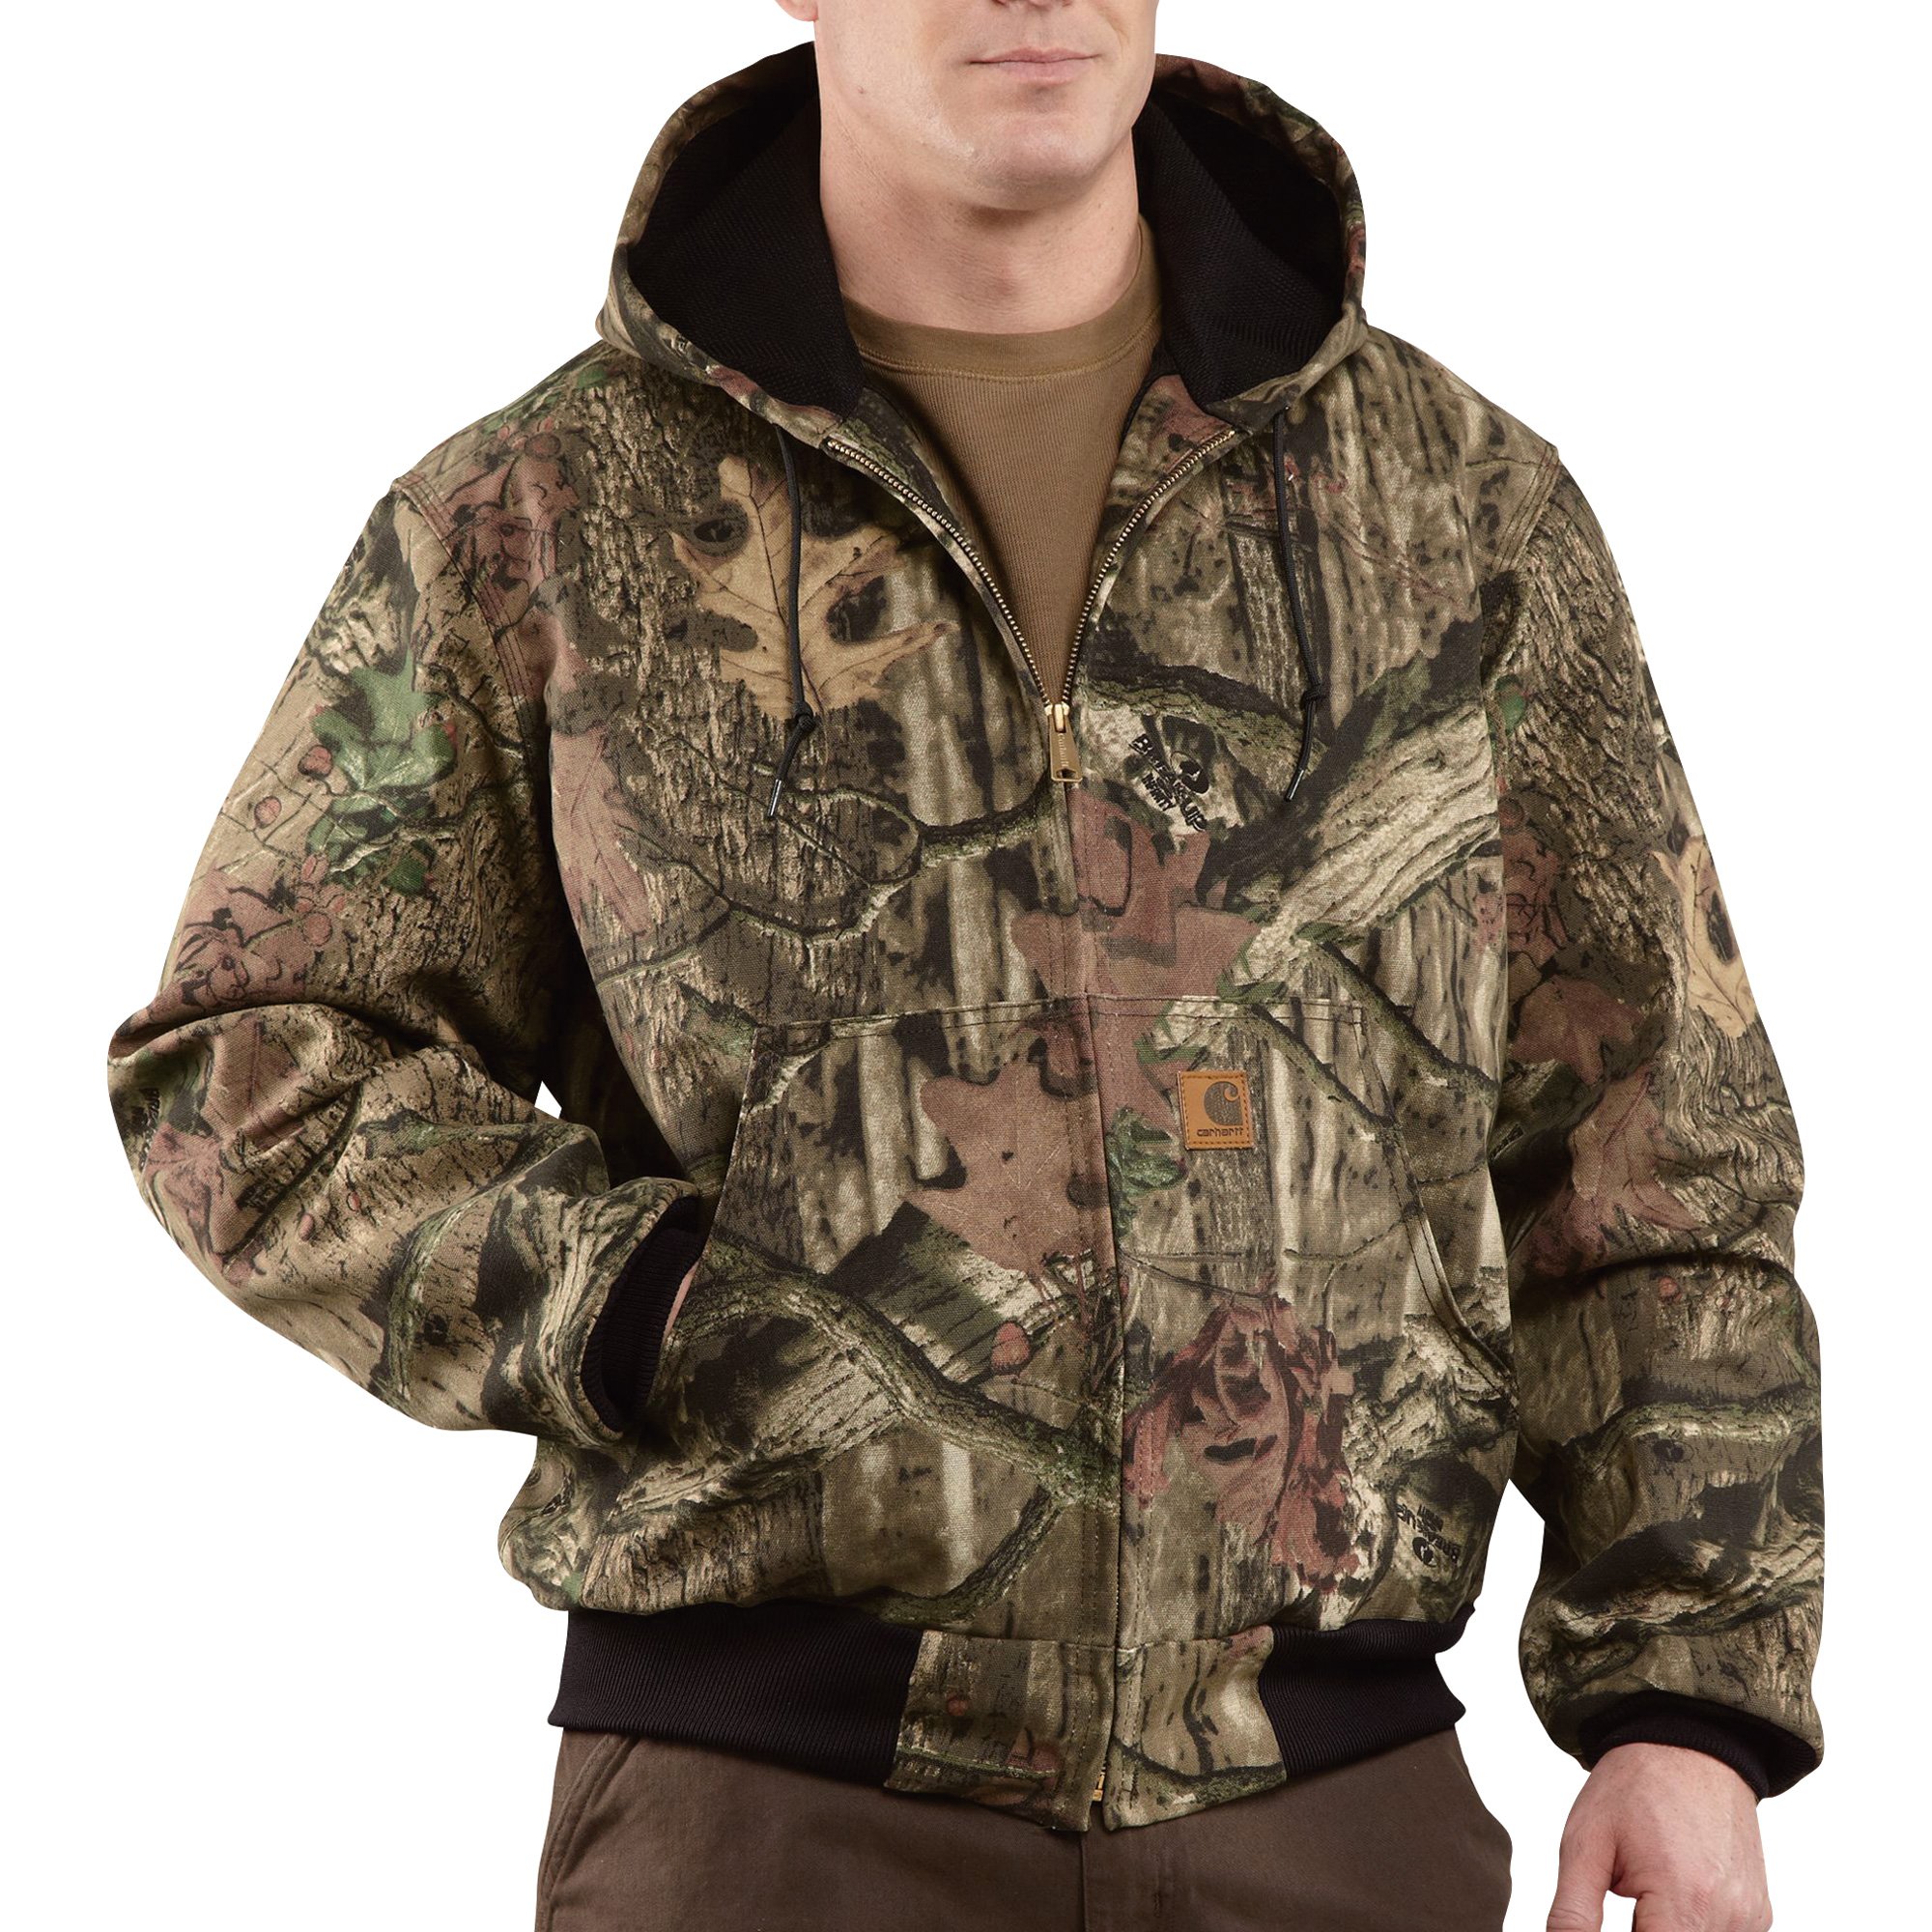 Berne Men's Realtree Edge Camouflage Insulated Hooded Jacket at